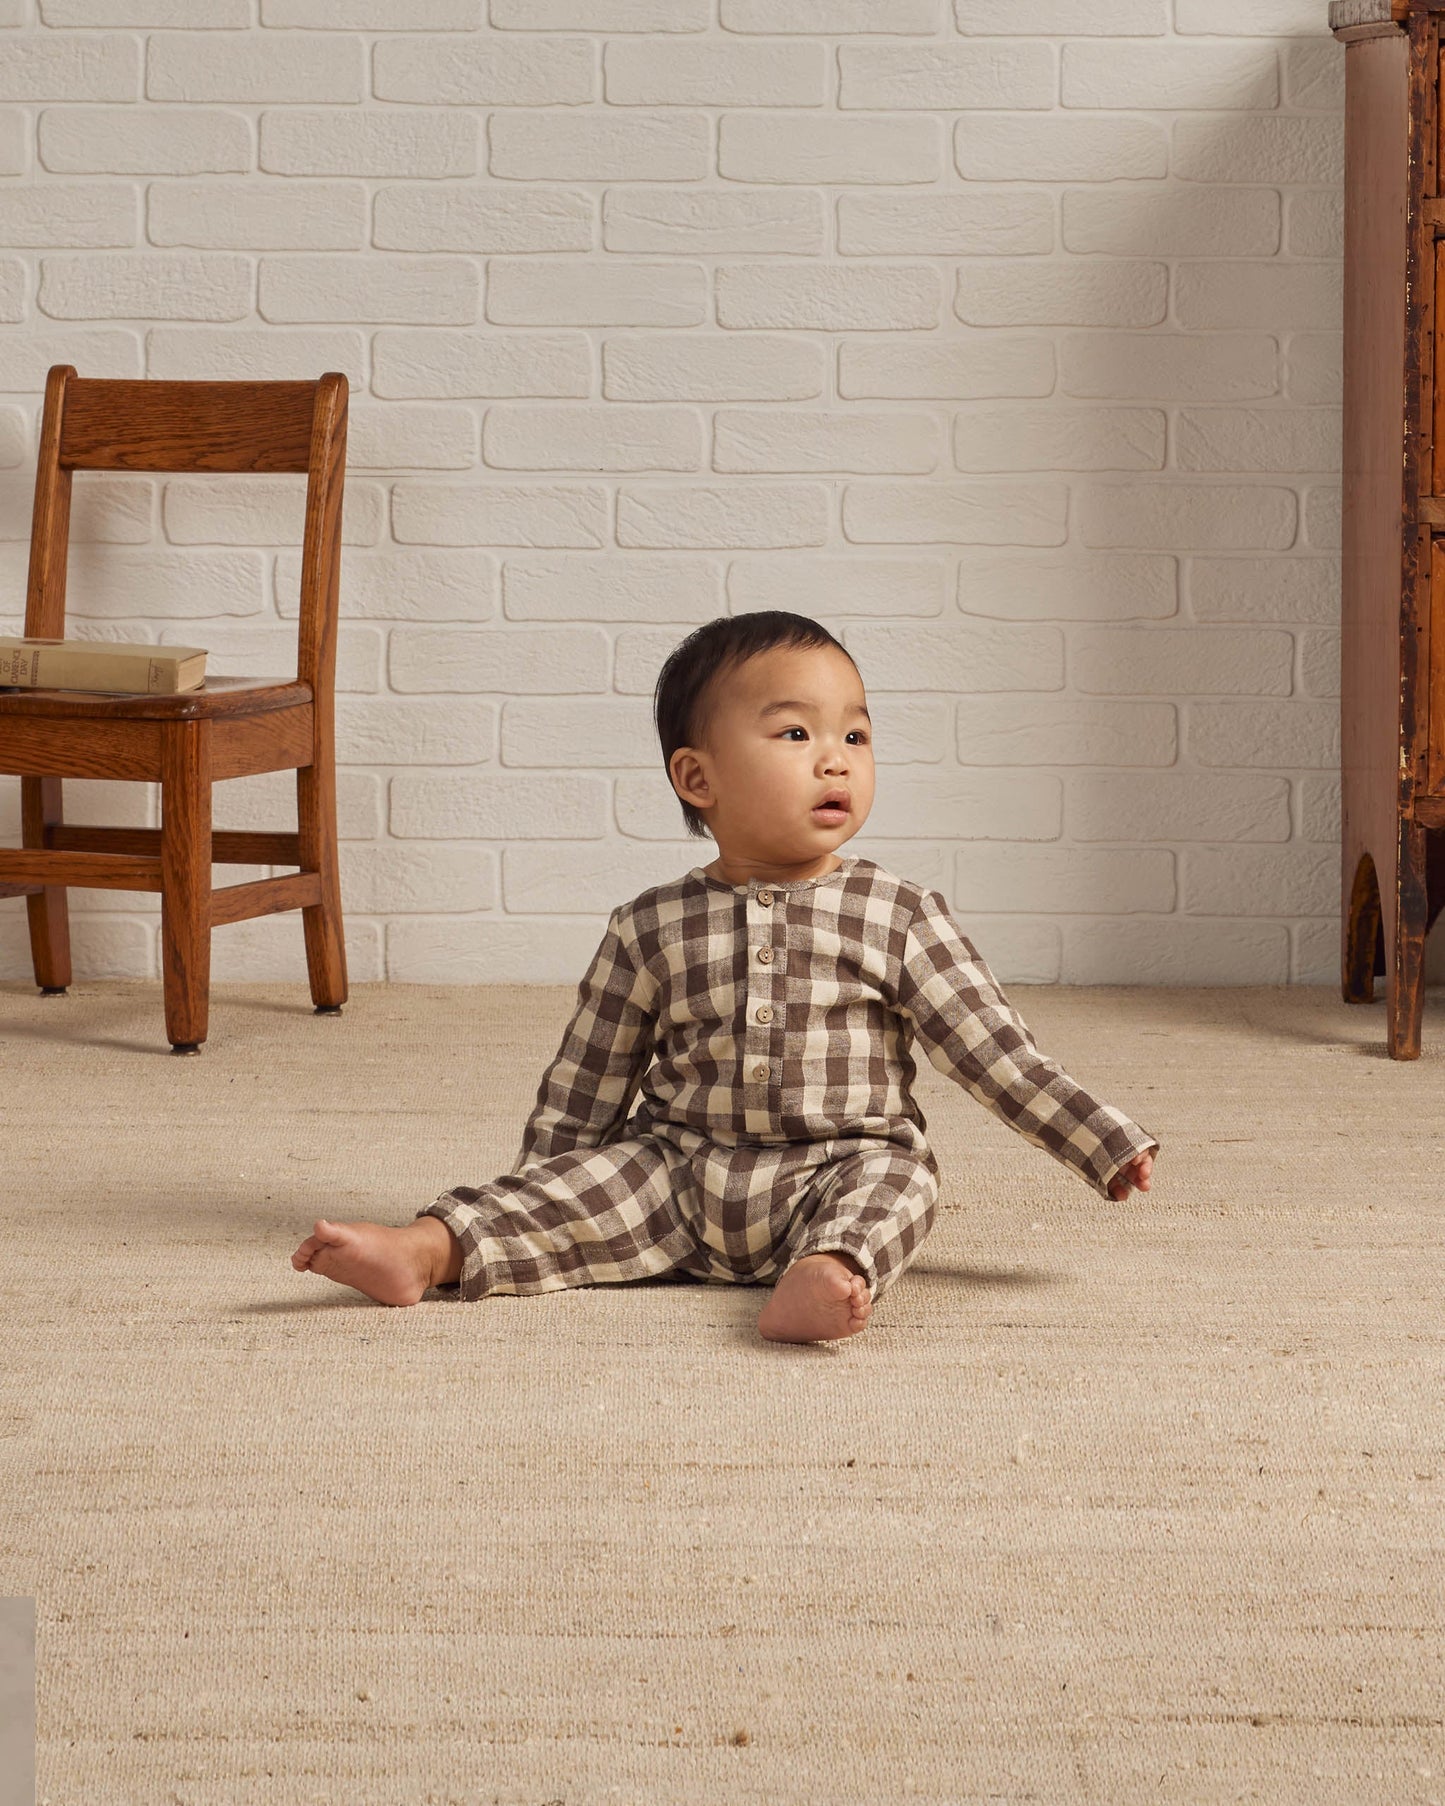 Long Sleeve Woven Jumpsuit | Chocolate Check